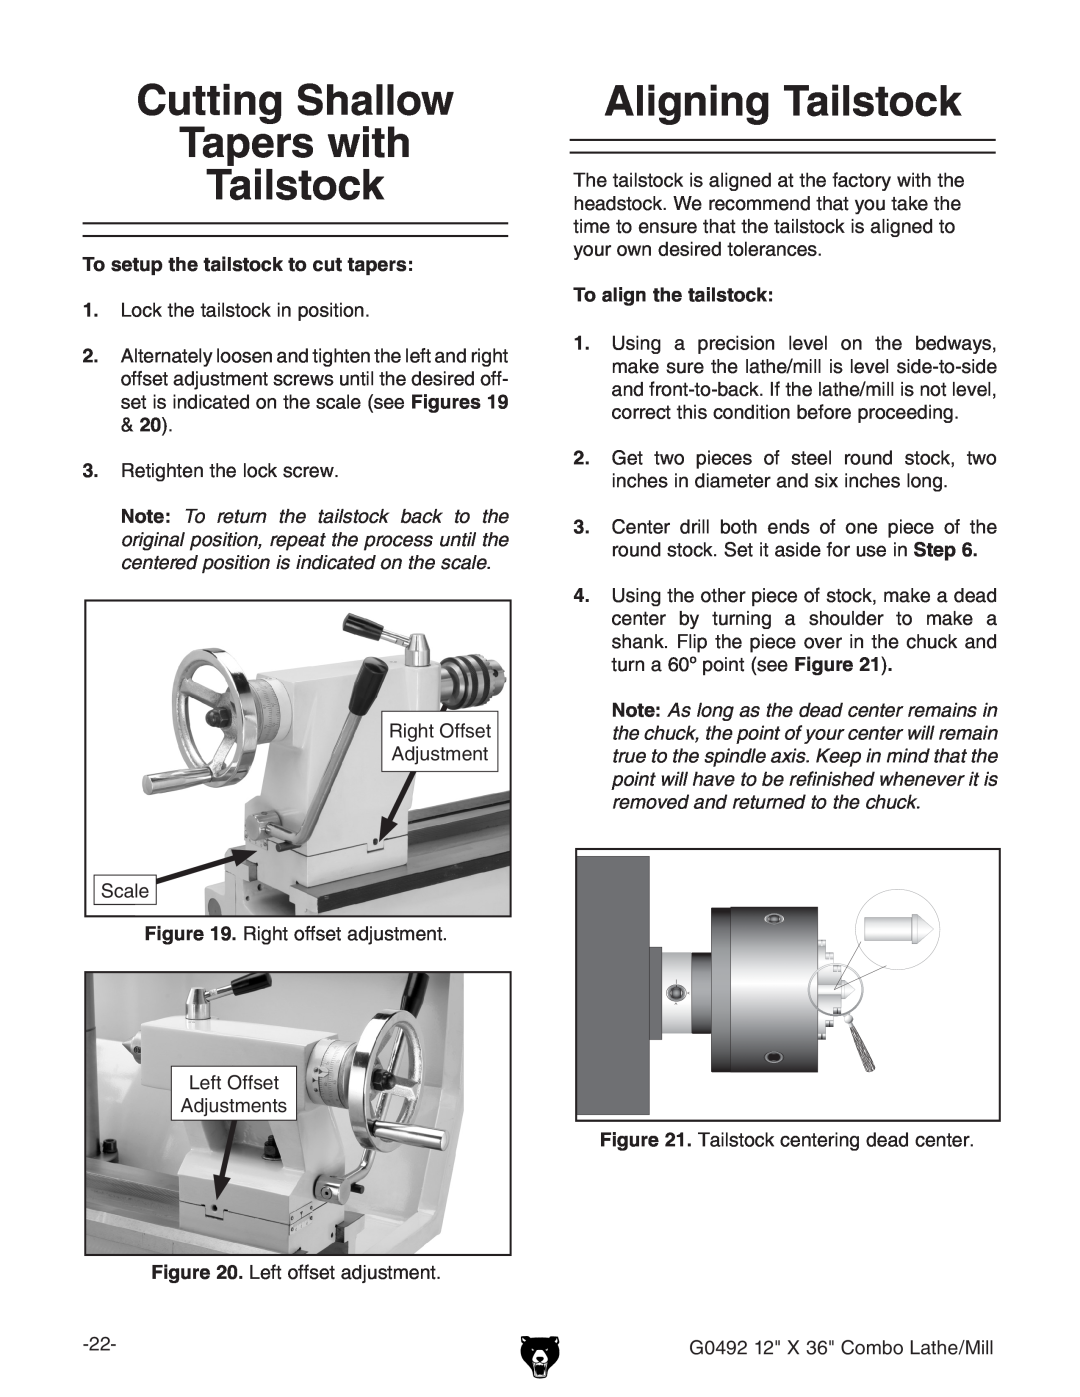 Grizzly G0492 owner manual Cutting Shallow Tapers with Tailstock, Aligning Tailstock, To setup the tailstock to cut tapers 